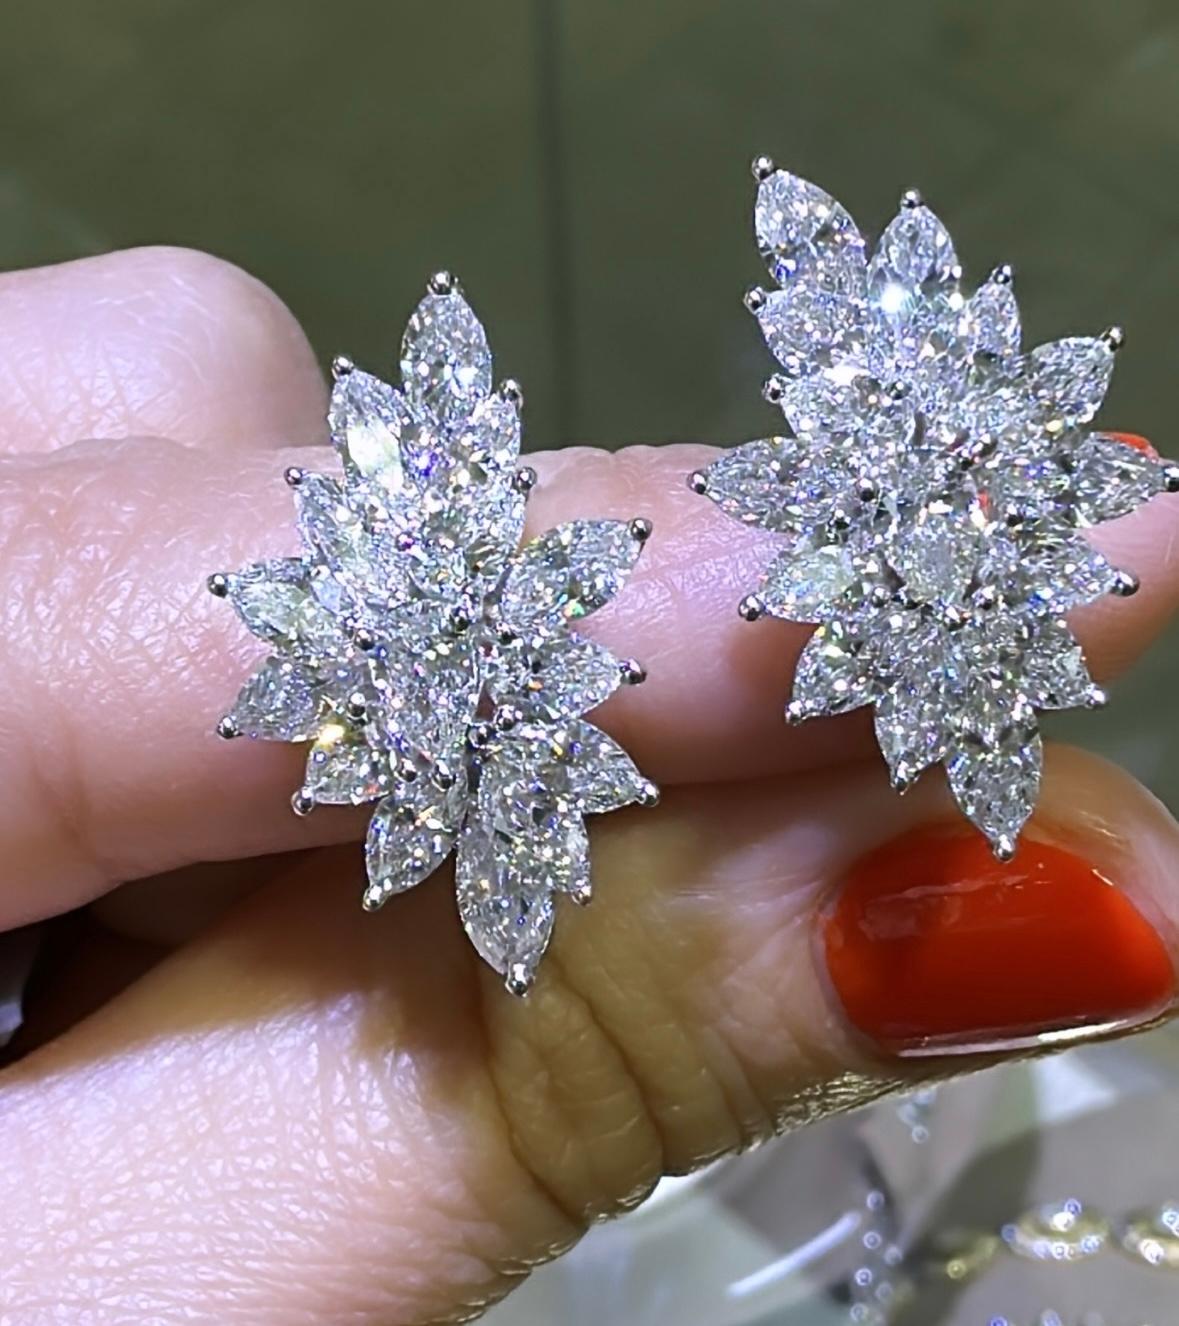 These exquisite spectacular marquise & pear shape diamond fancy earrings showcase a stunning 6.23ct total weight of diamonds. A luxurious addition to any jewelry collection, these one-of-a-kind earrings will lend sophistication and elegance to any